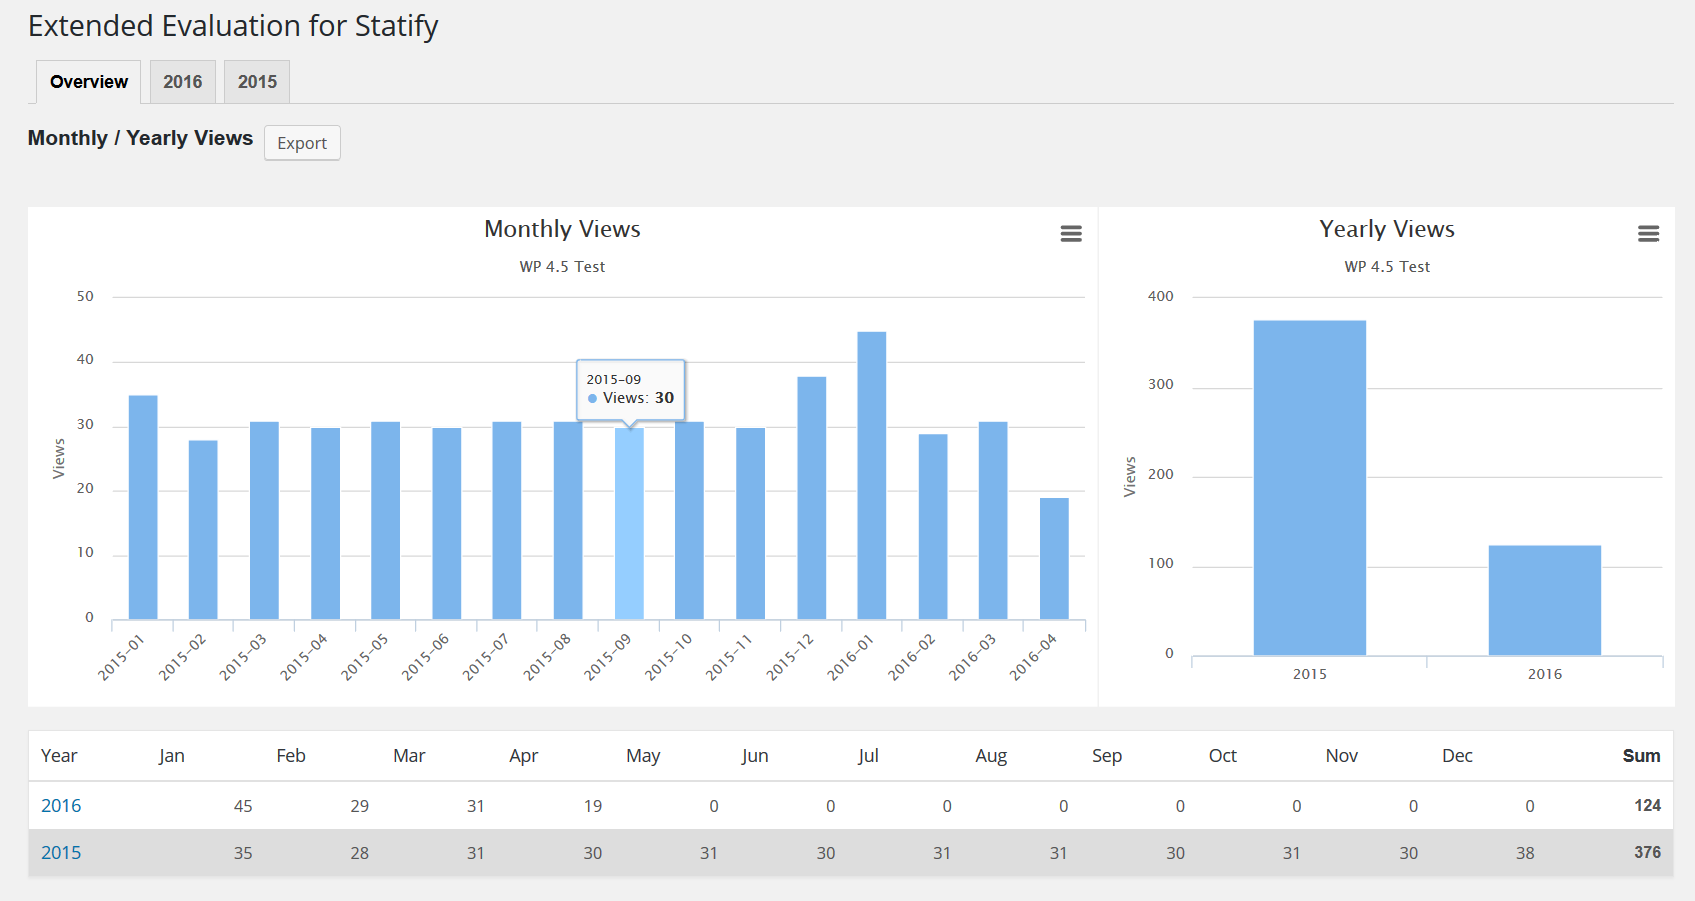 Monthly / yearly views